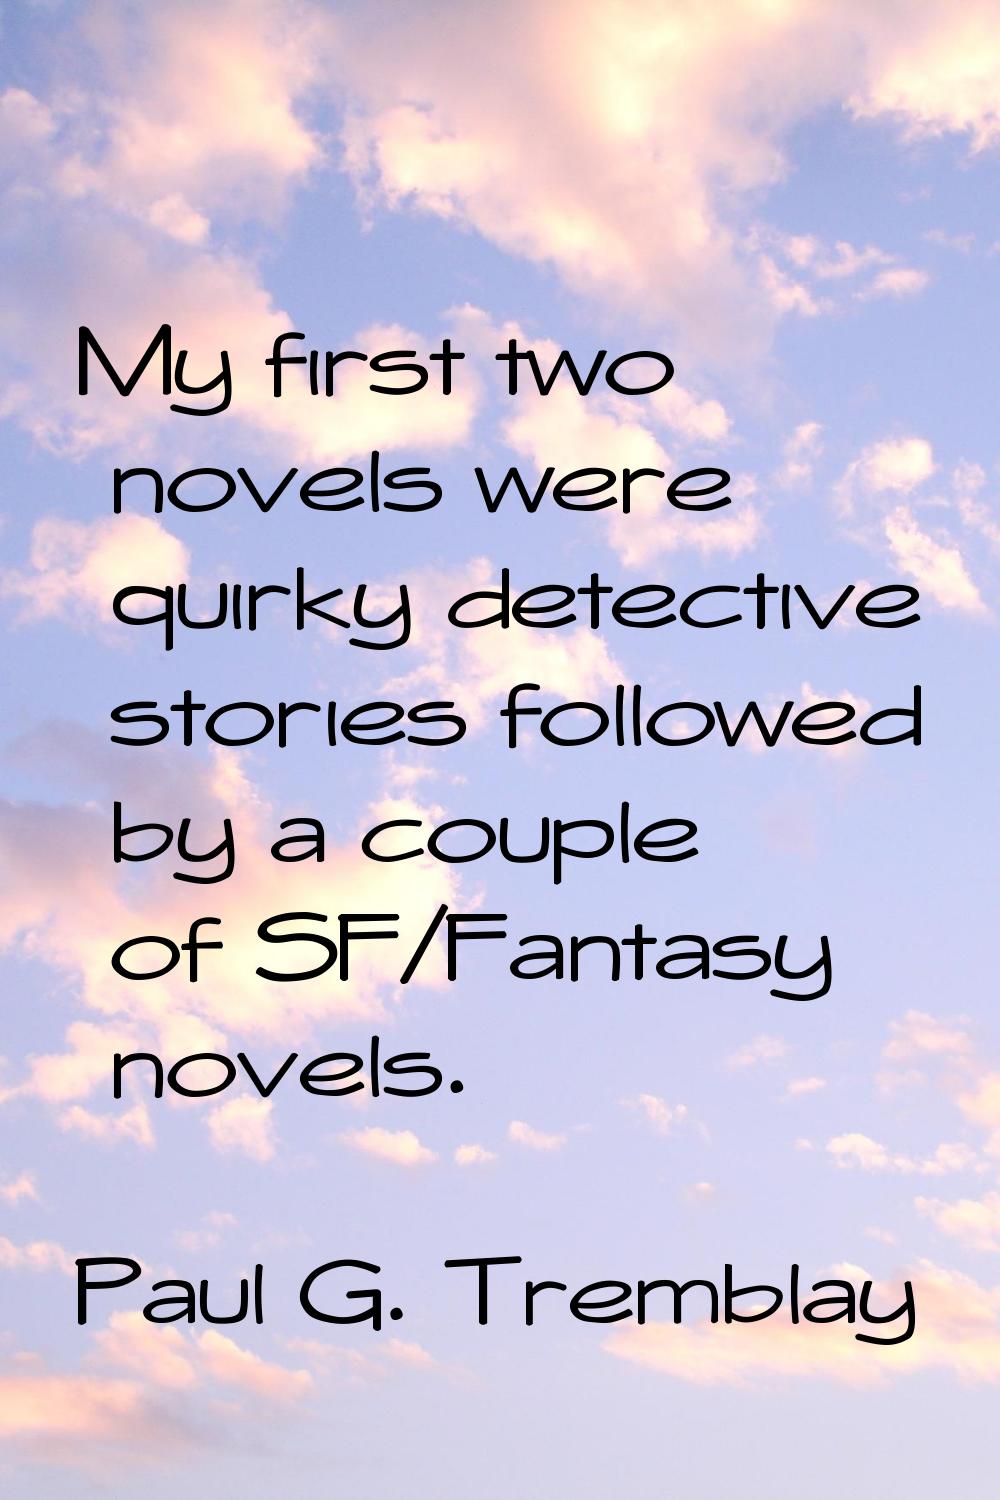 My first two novels were quirky detective stories followed by a couple of SF/Fantasy novels.